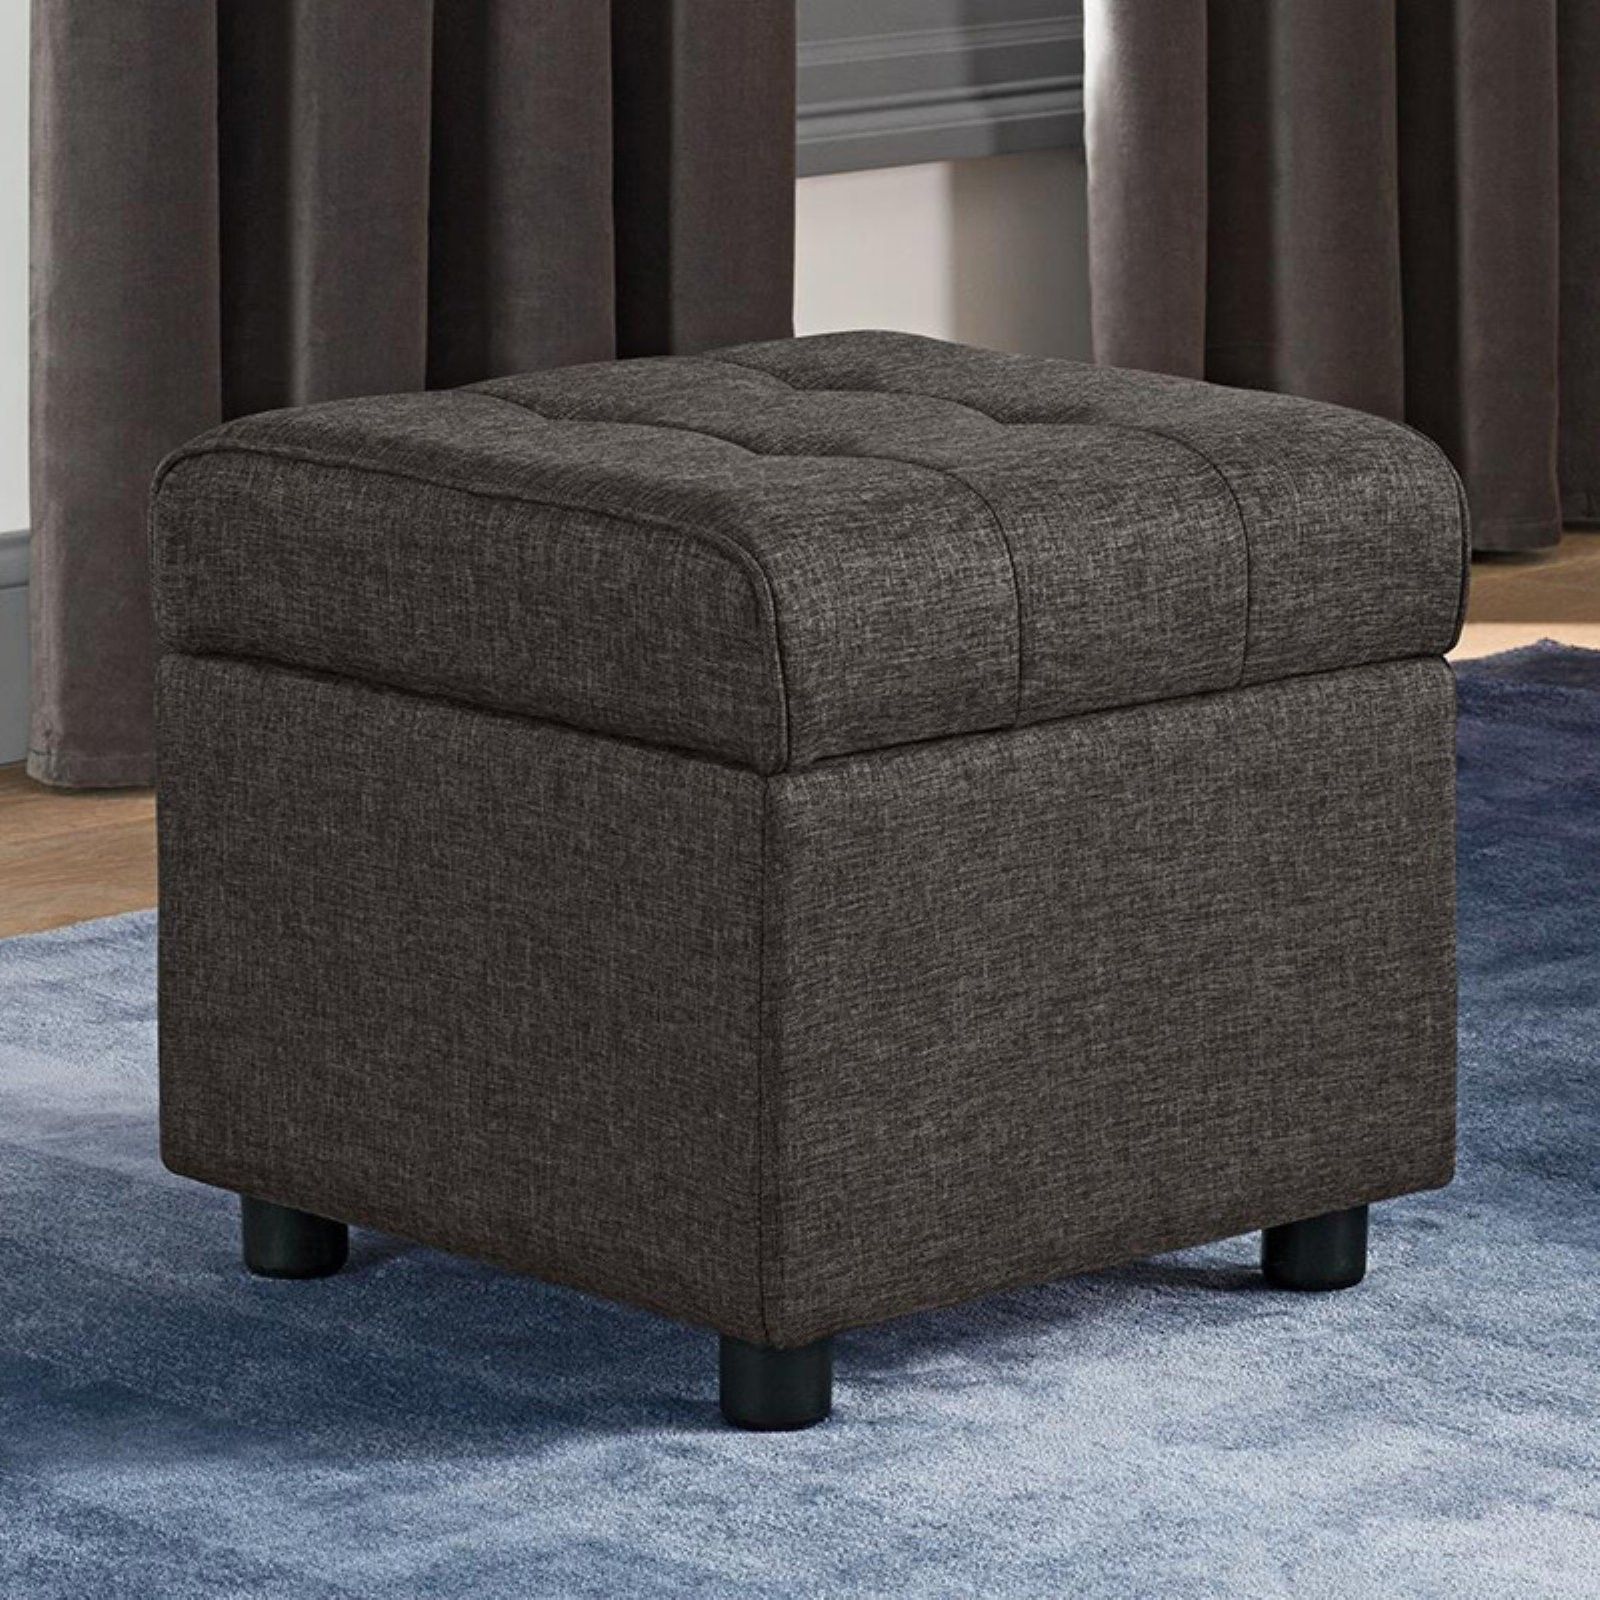 Dhp Emily Square Faux Leather Storage Ottoman Dark Gray S | Storage For Orange Tufted Faux Leather Storage Ottomans (View 7 of 20)